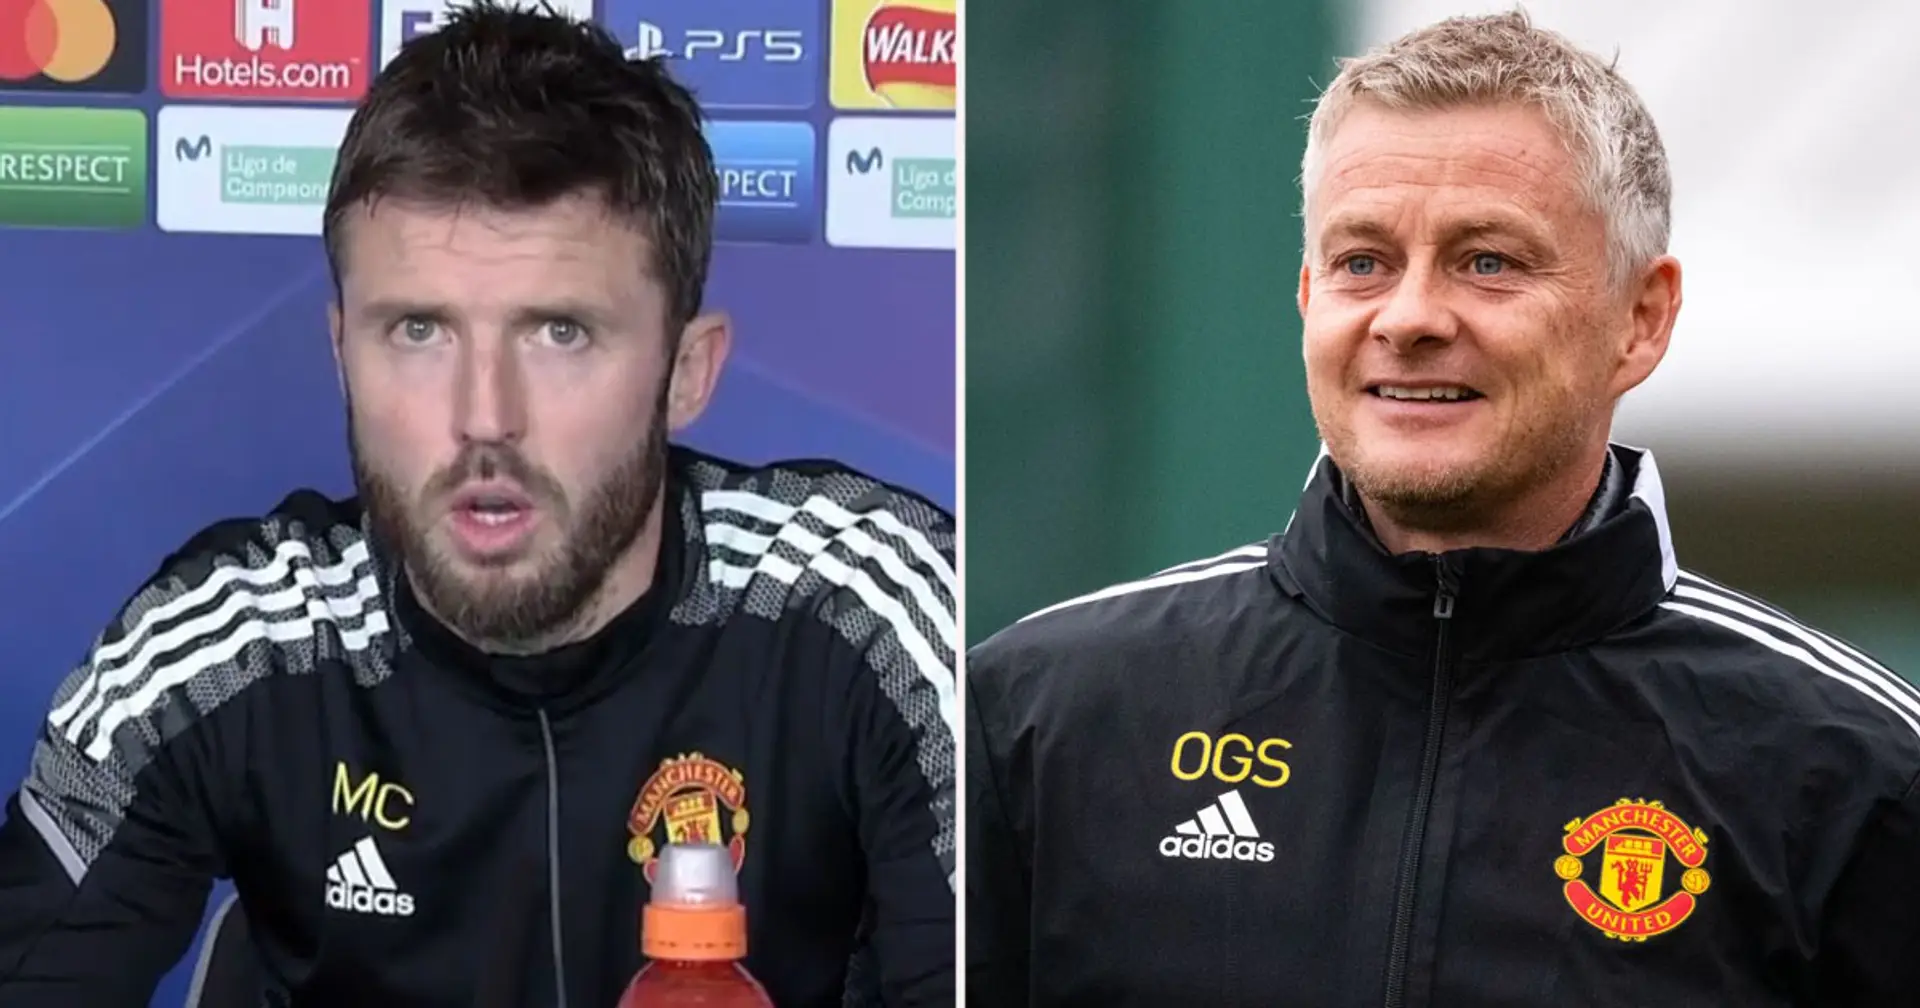 'That's why we worked together for so long': Carrick admits he has 'very similar' beliefs as Solskjaer